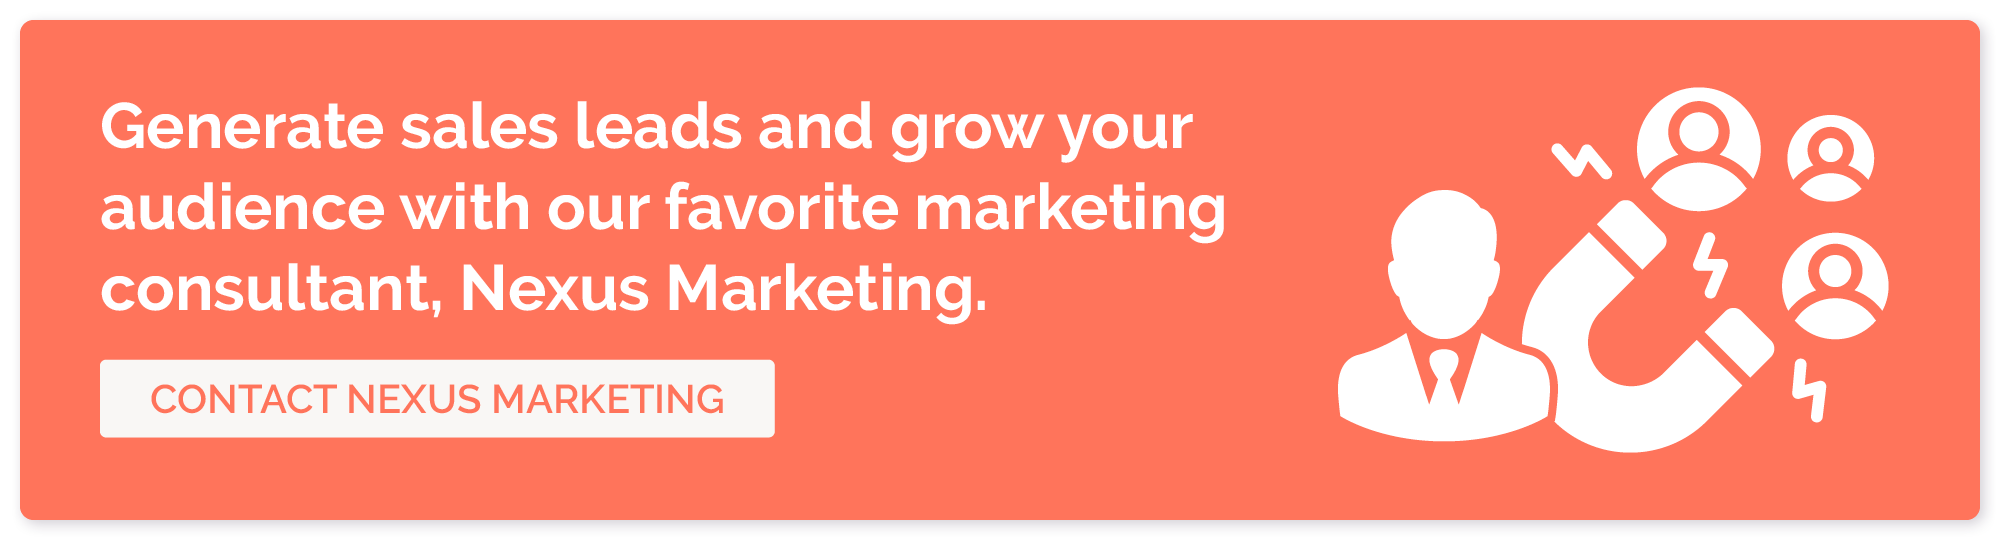 Generate sales leads and grow your audience with our favorite marketing consultant, Nexus Marketing.